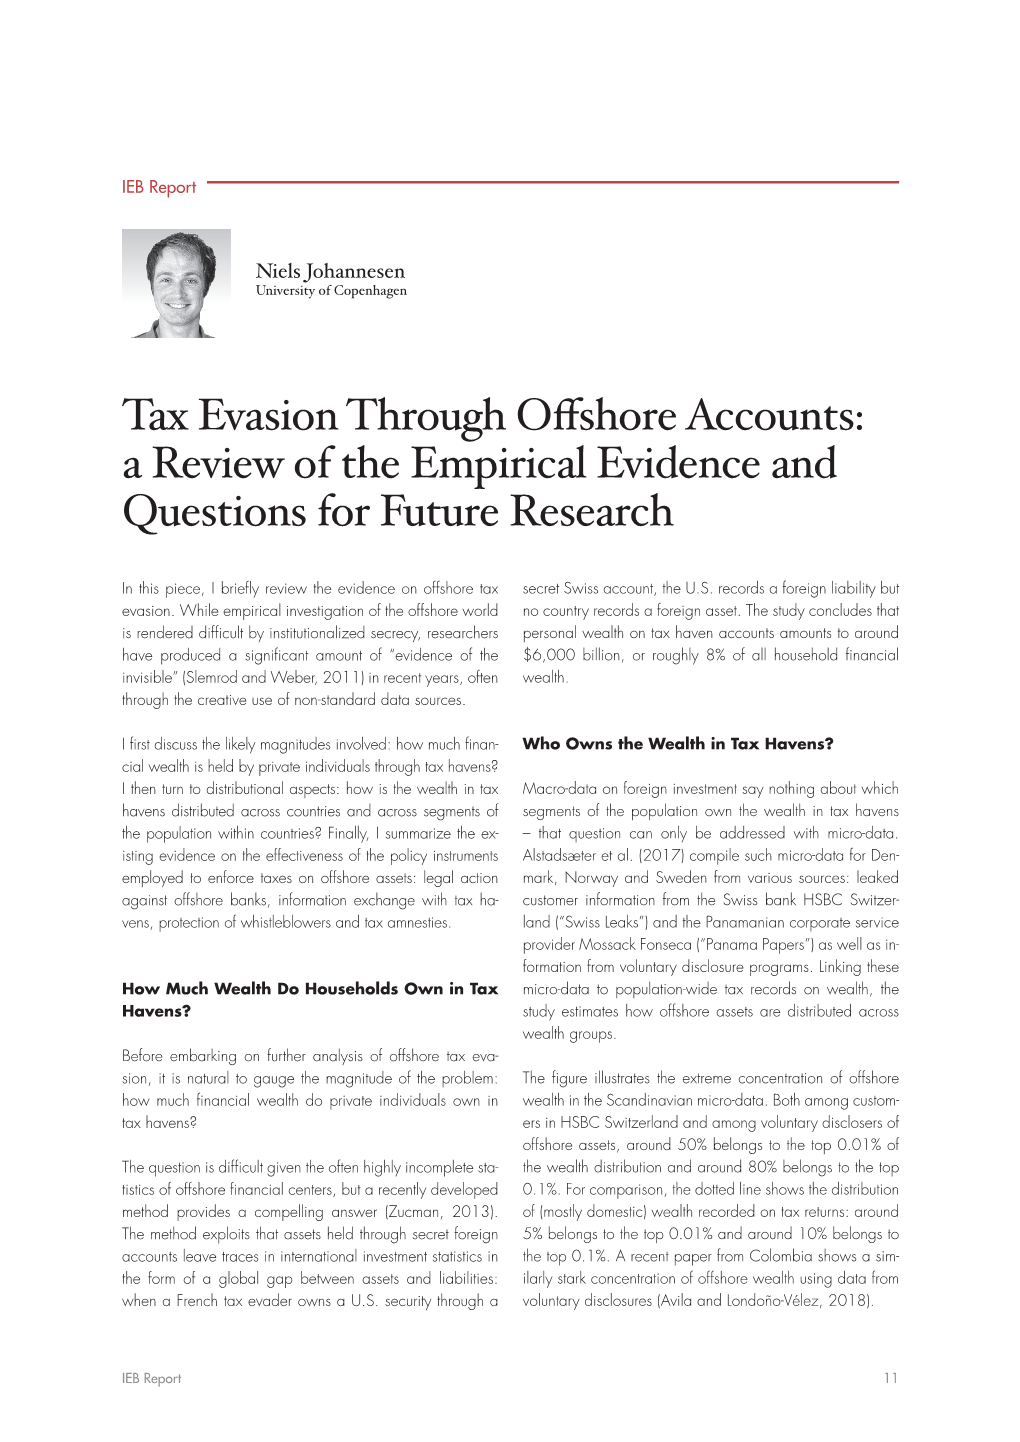 Tax Evasion Through Offshore Accounts: a Review of the Empirical Evidence and Questions for Future Research